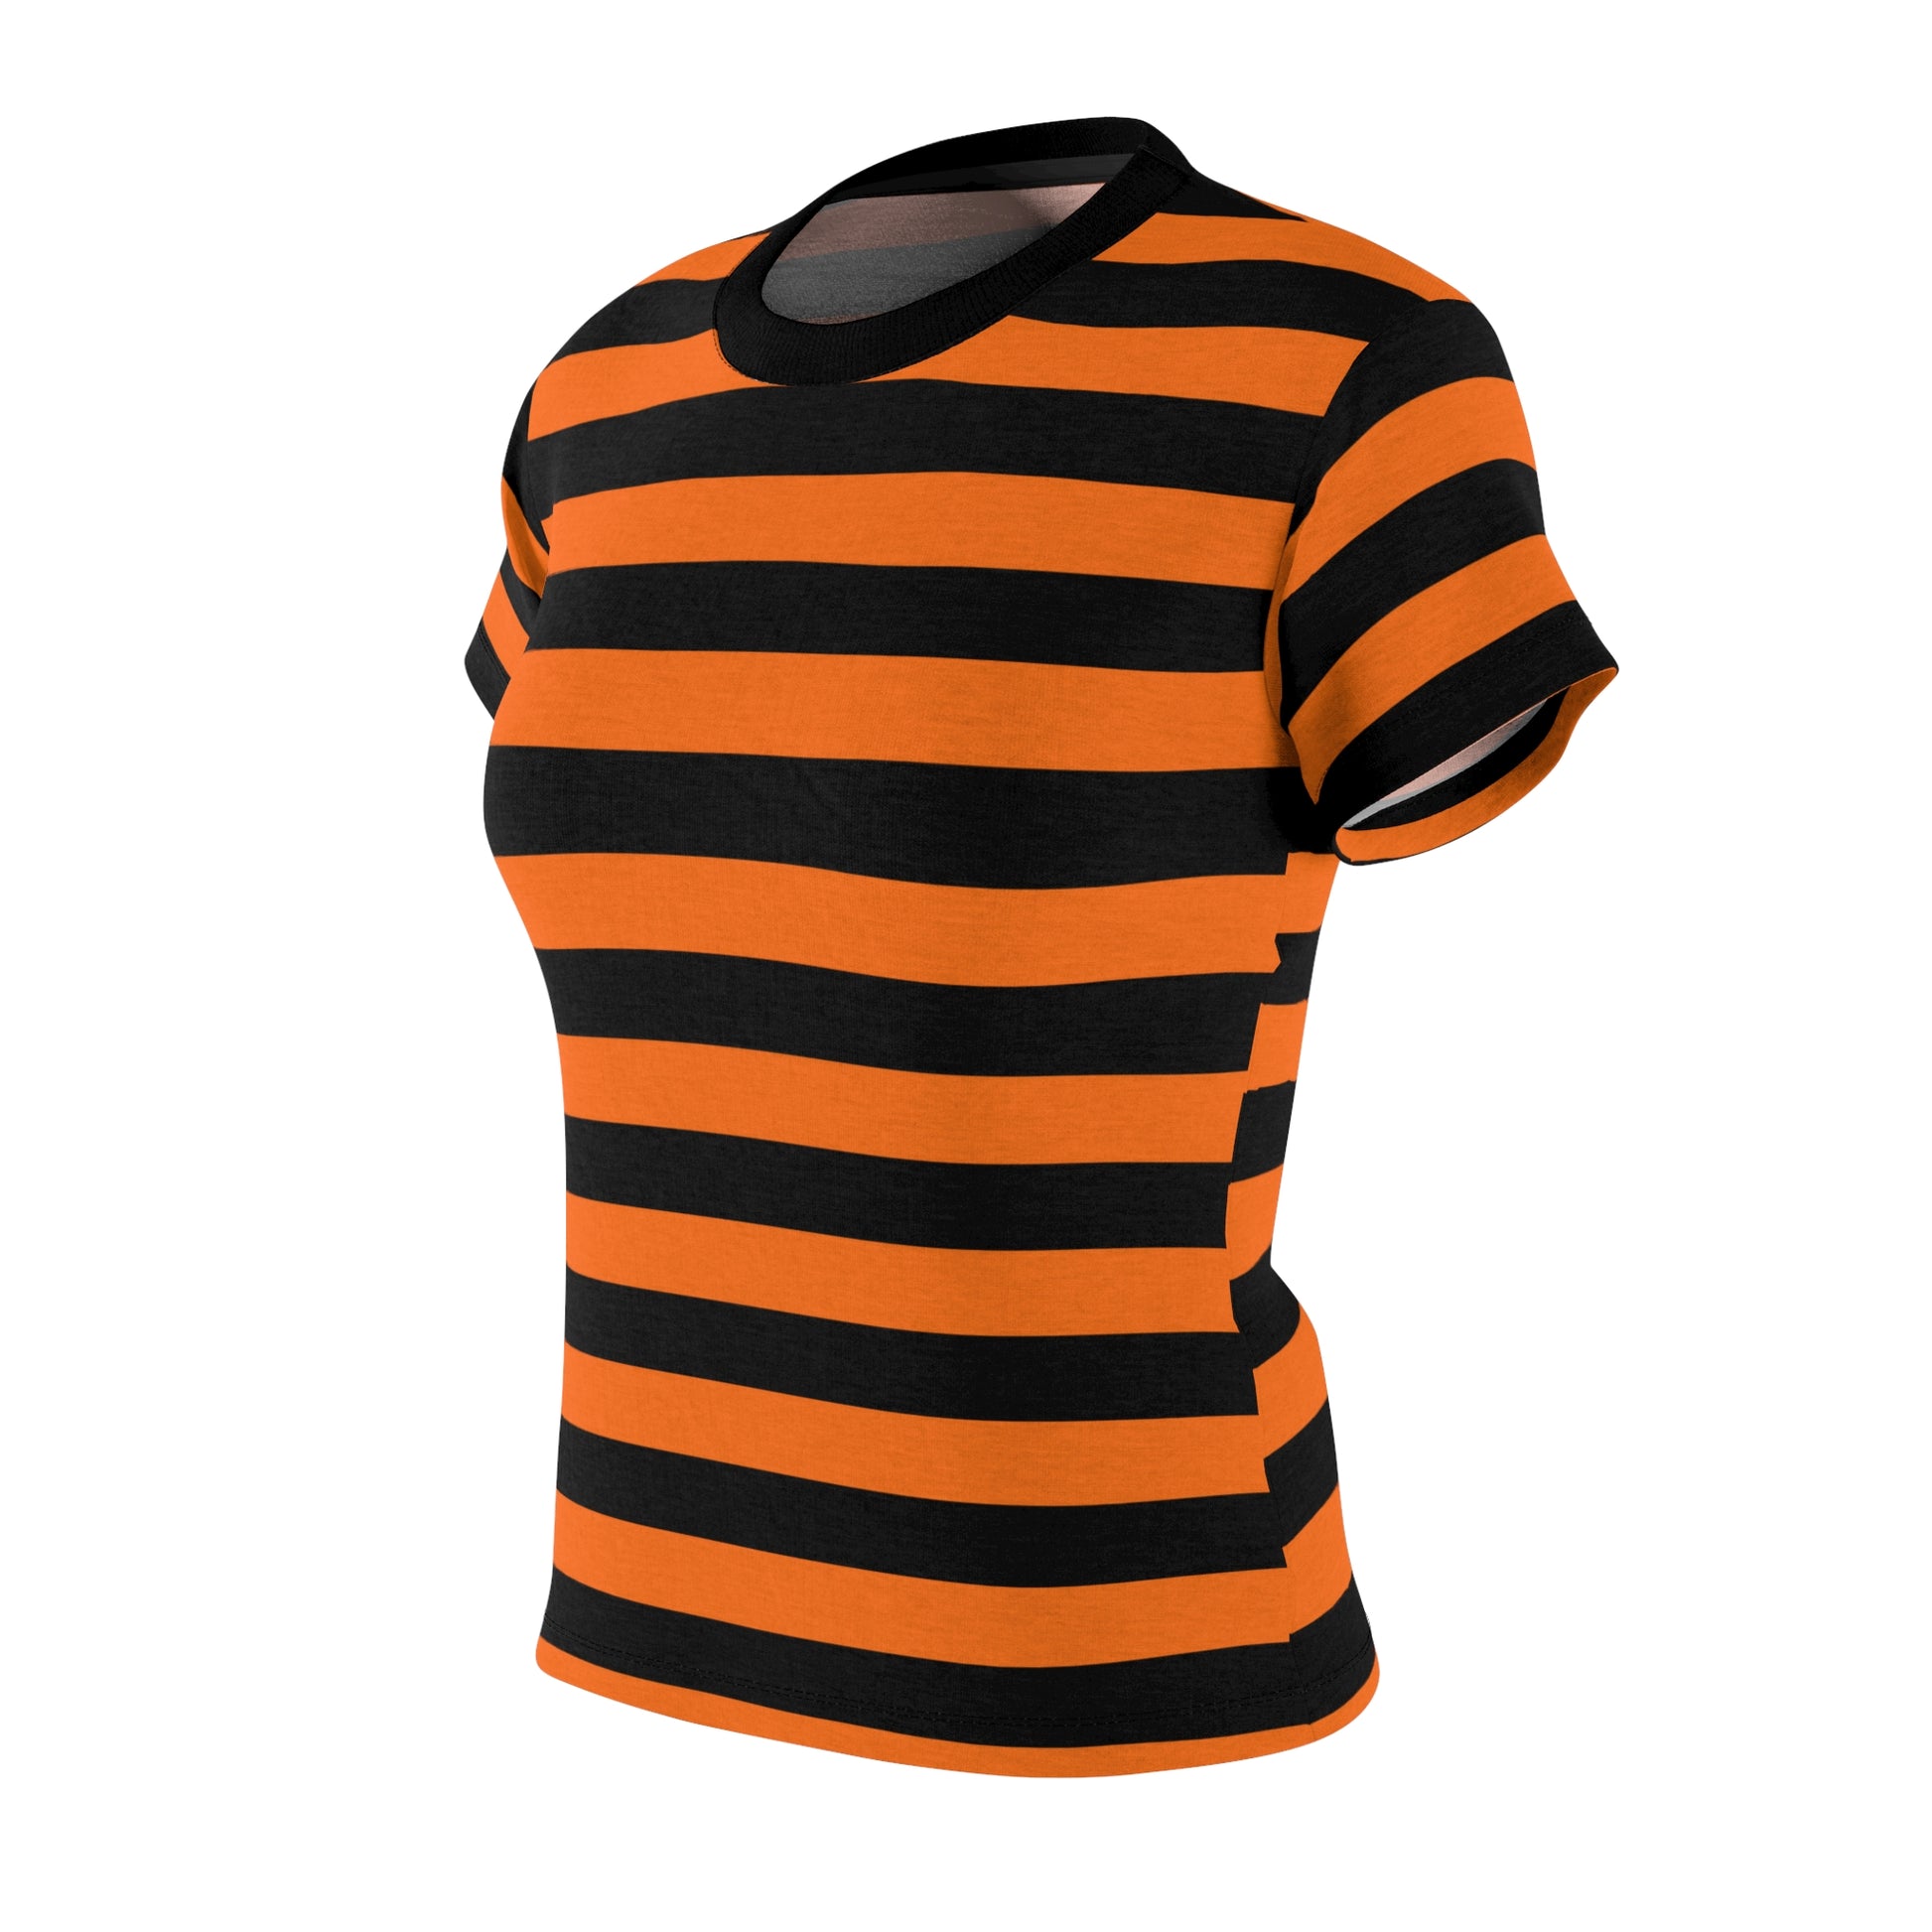 Black and Orange Striped Women Tshirt, Halloween Designer Adult Graphic Aesthetic Fashion Fitted Crewneck Tee Shirt Top Starcove Fashion